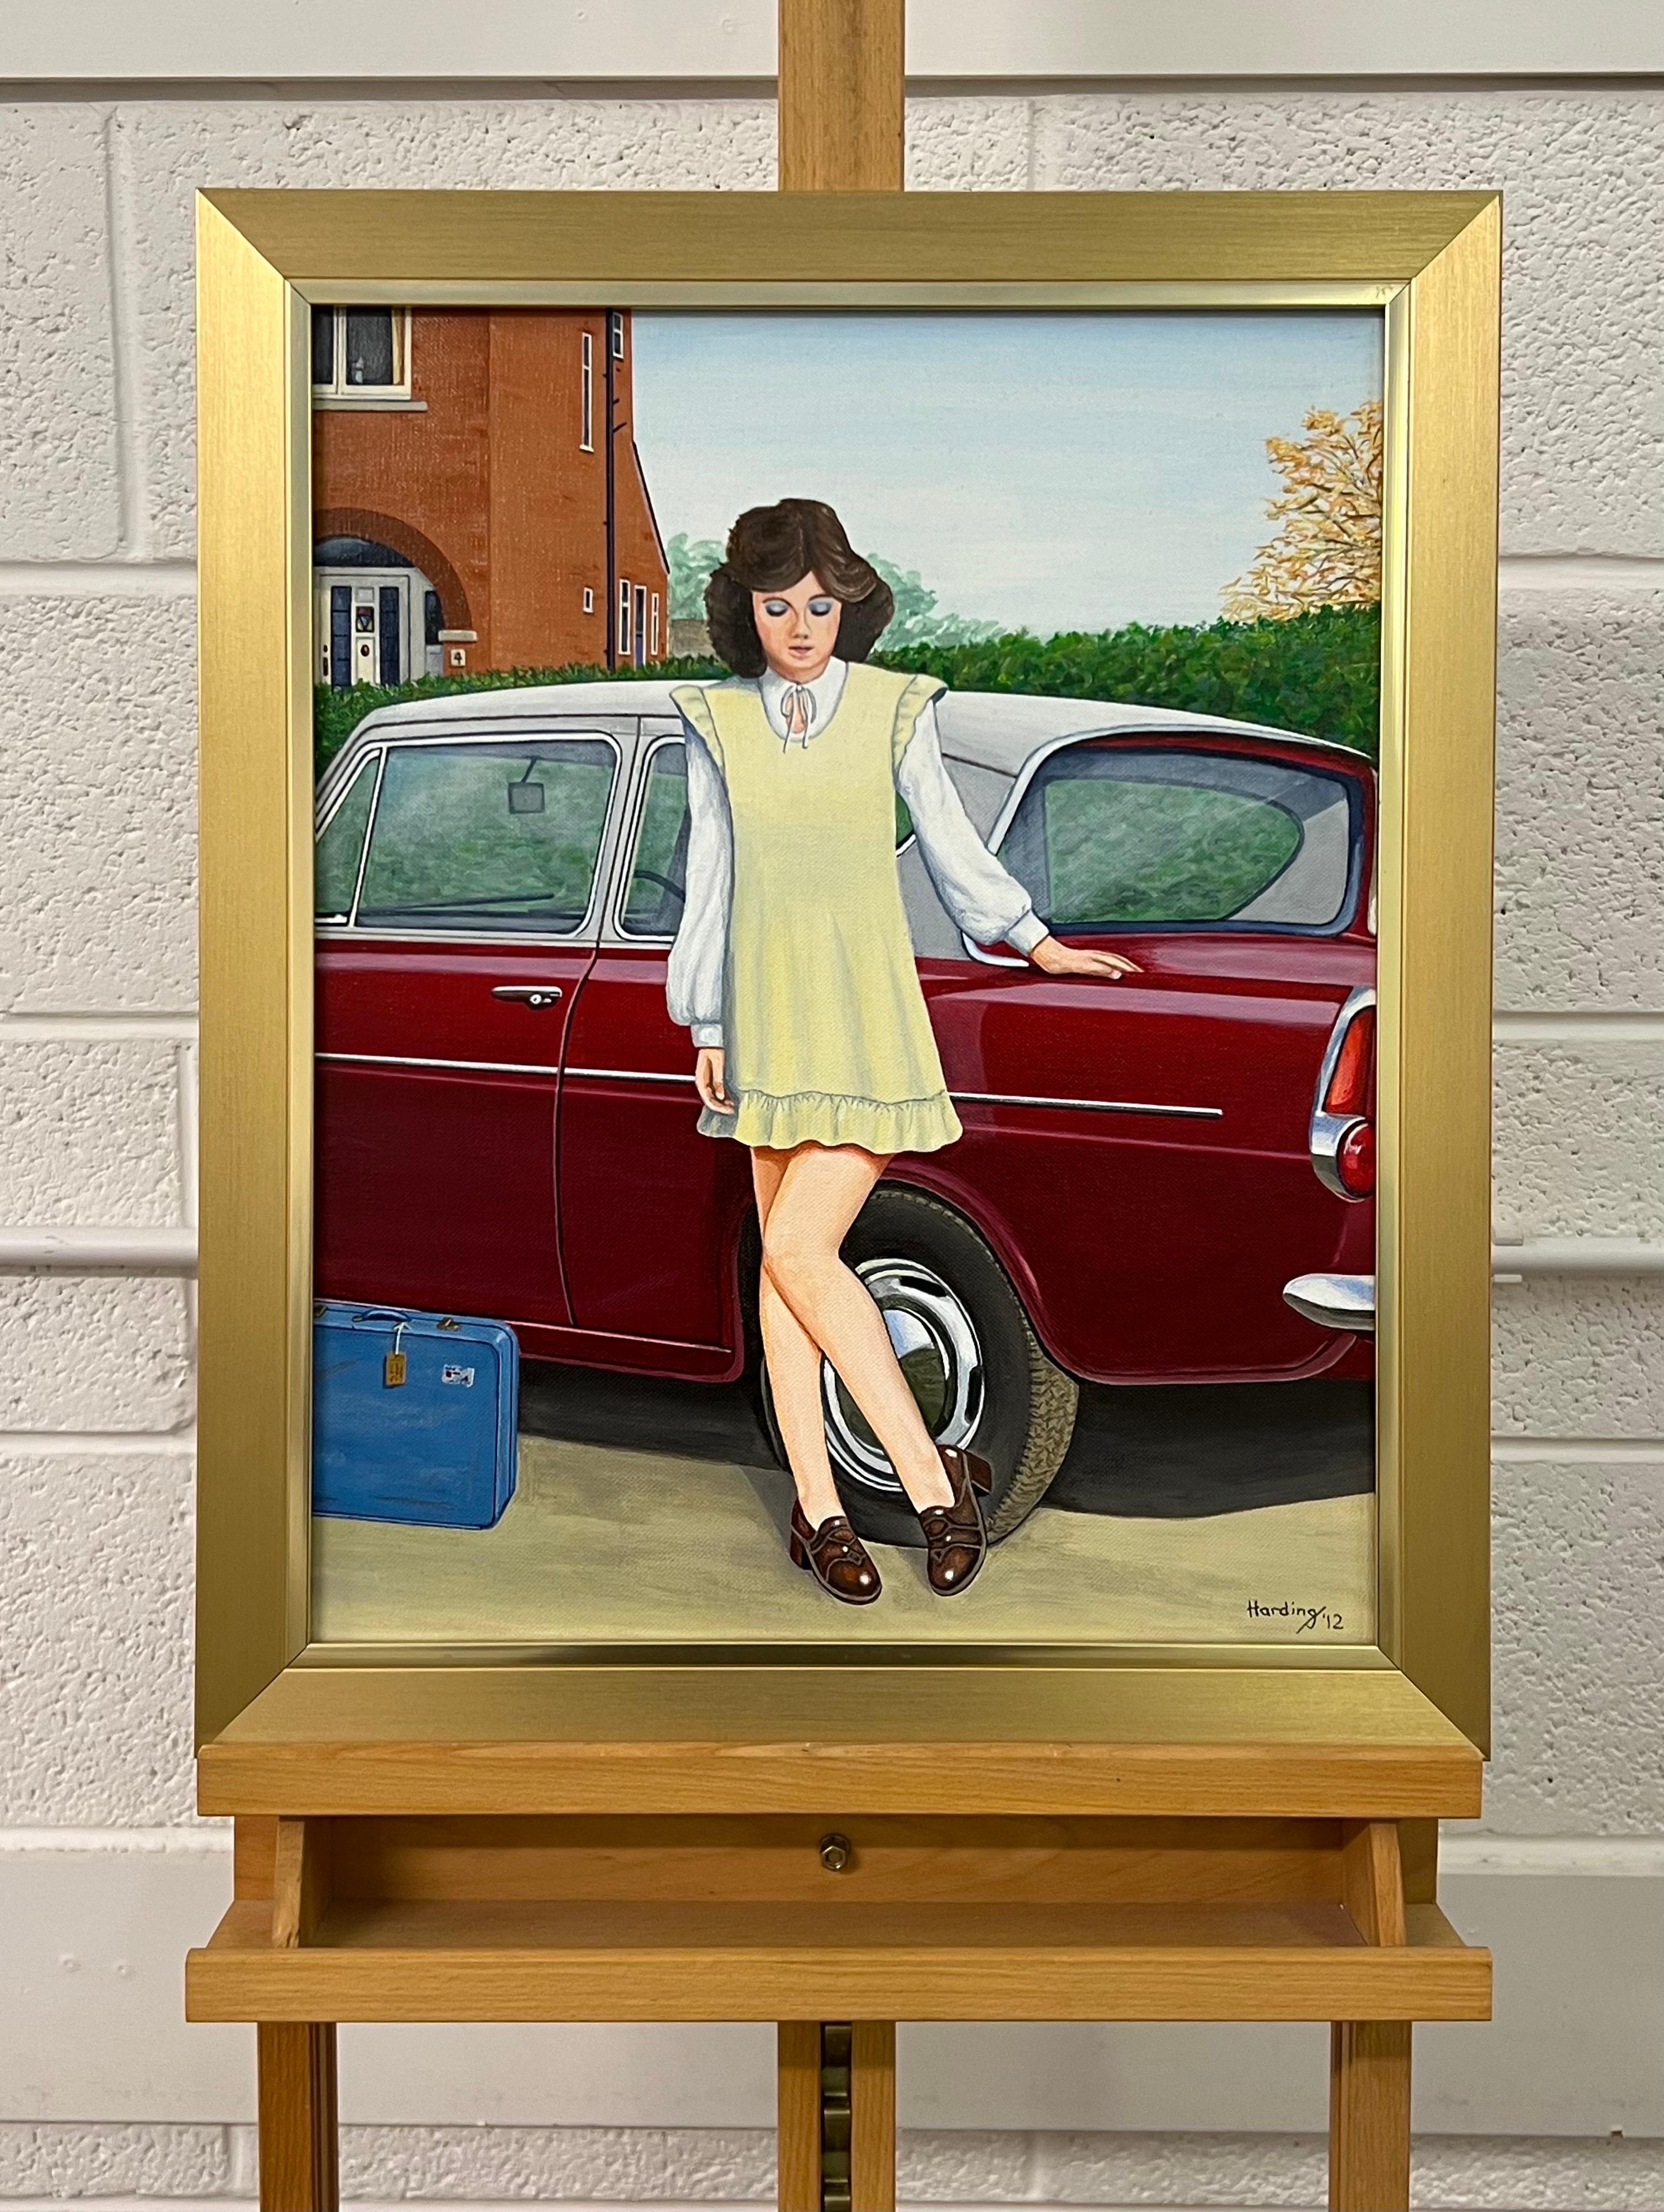 Vintage Englisch Frau in Suburbia mit Classic Ford Auto 1960's 1970's England  (Englische Schule), Painting, von Paul F Harding